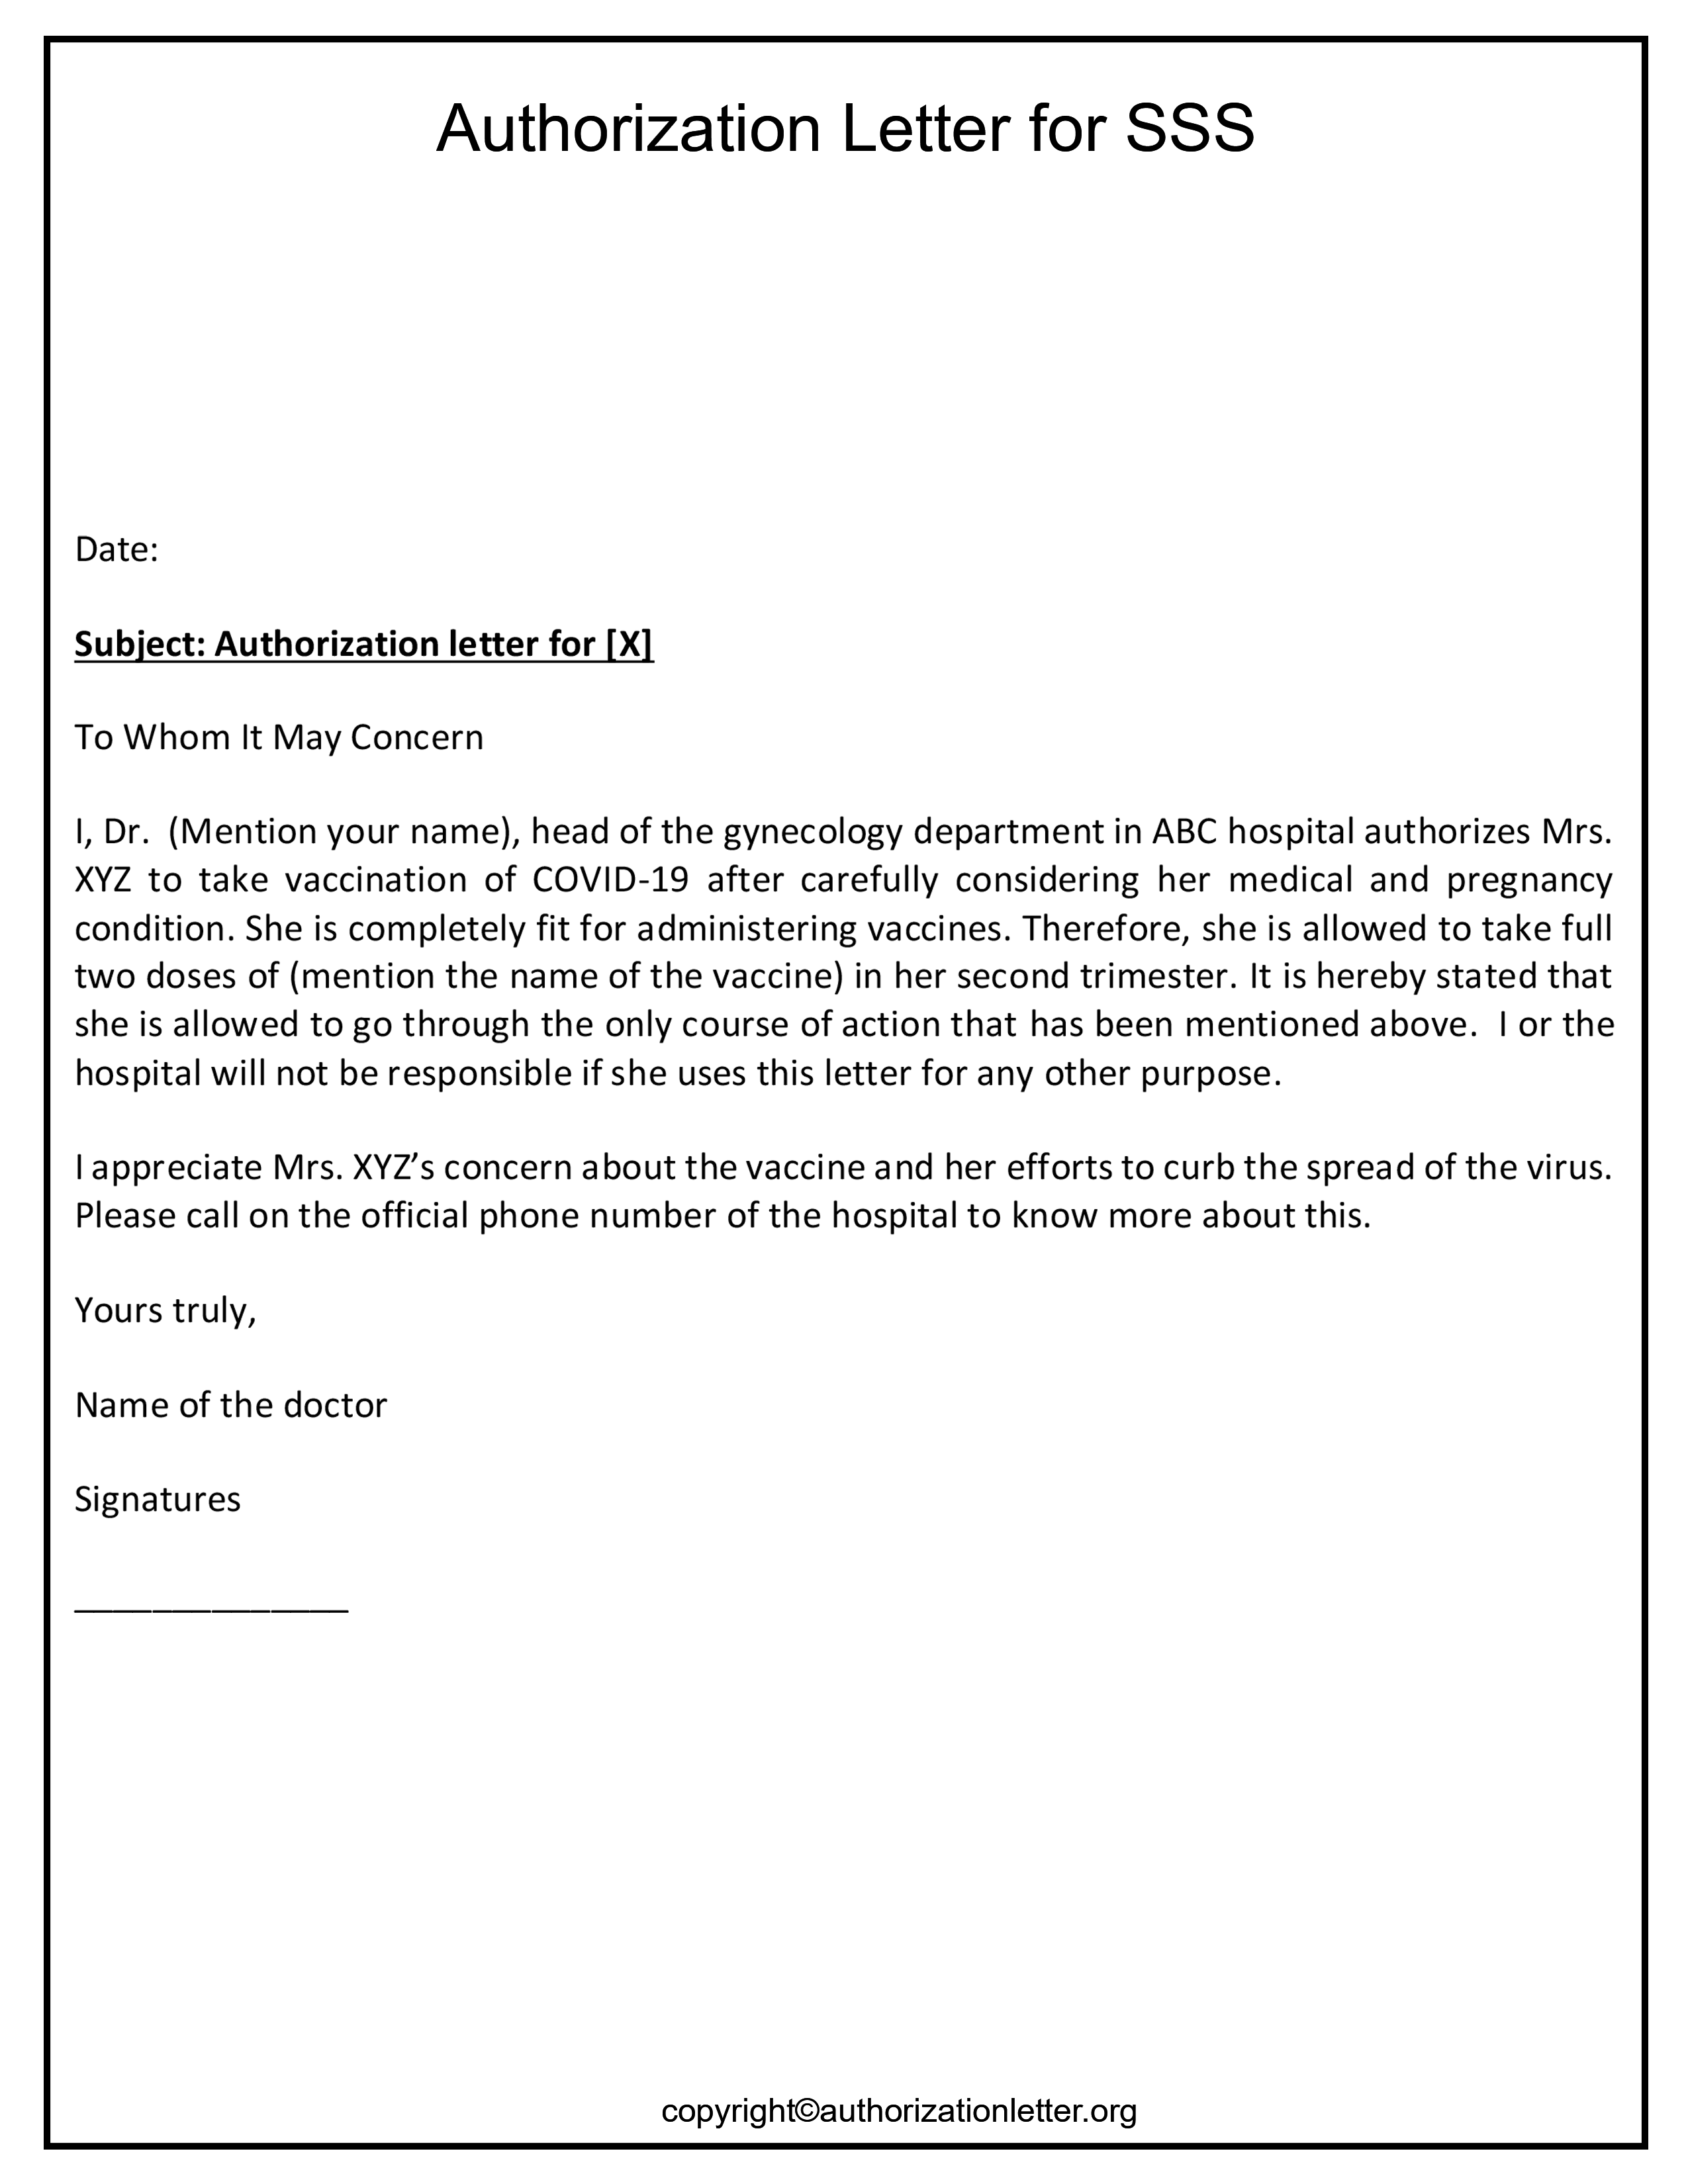 Authorization Letter for SSS Maternity